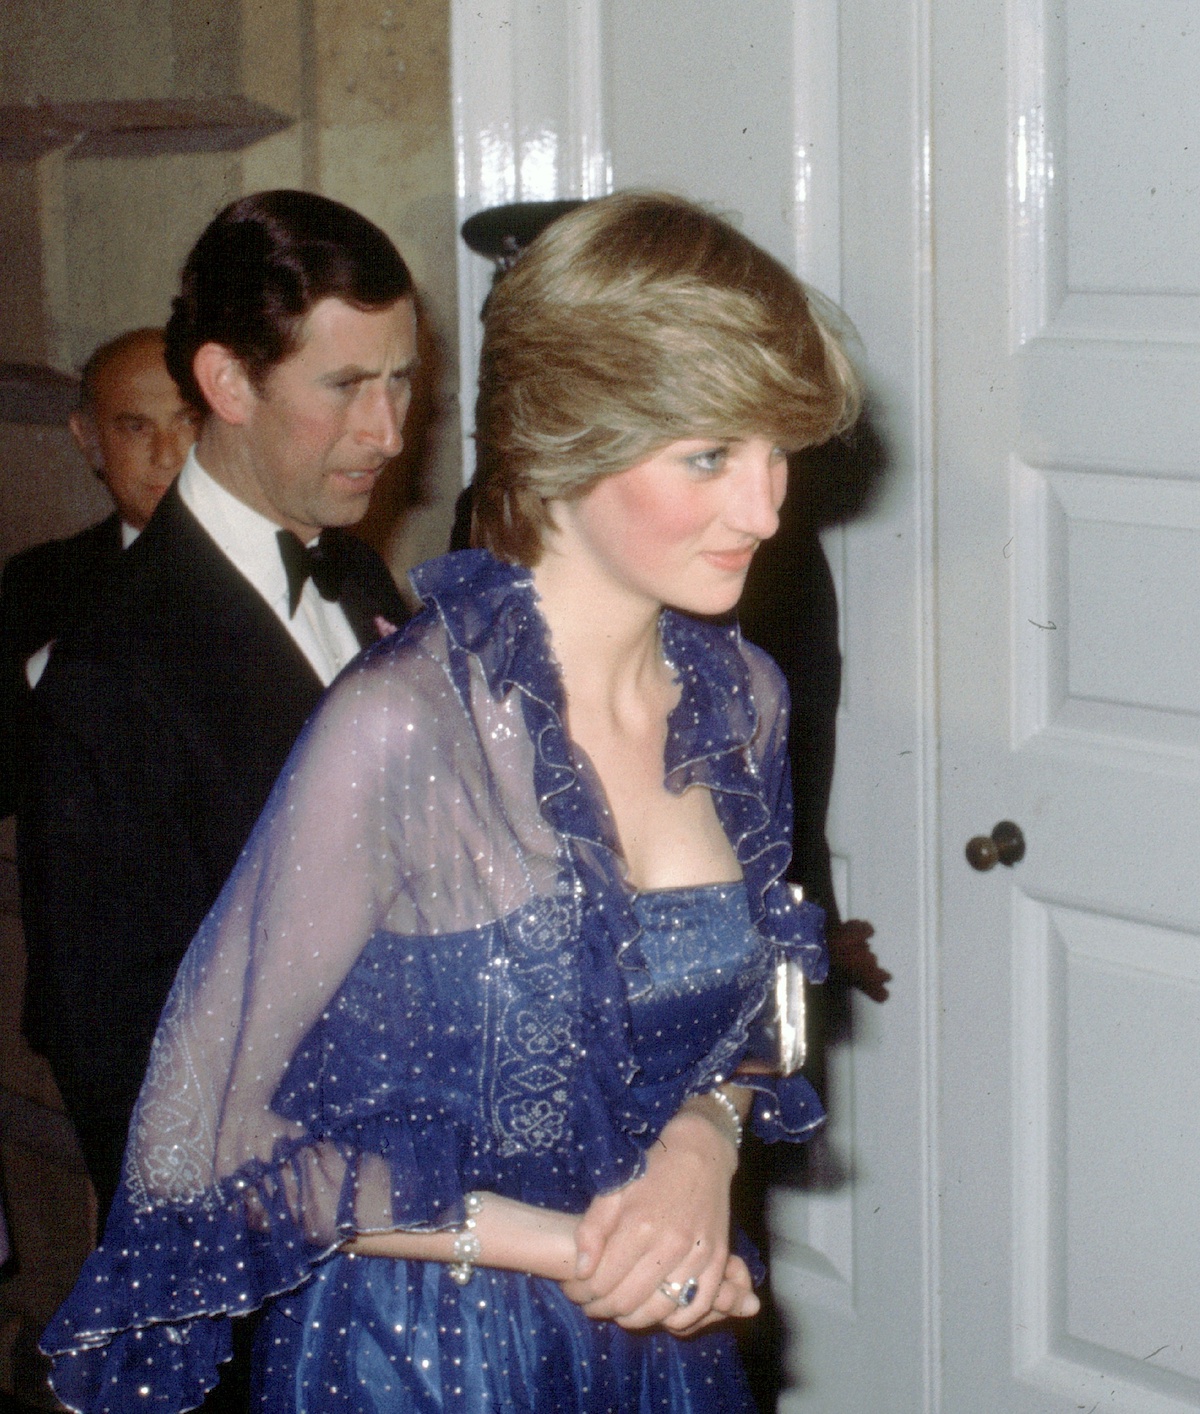 Prince Charles and Princess Diana attend an event at the Royal Academy